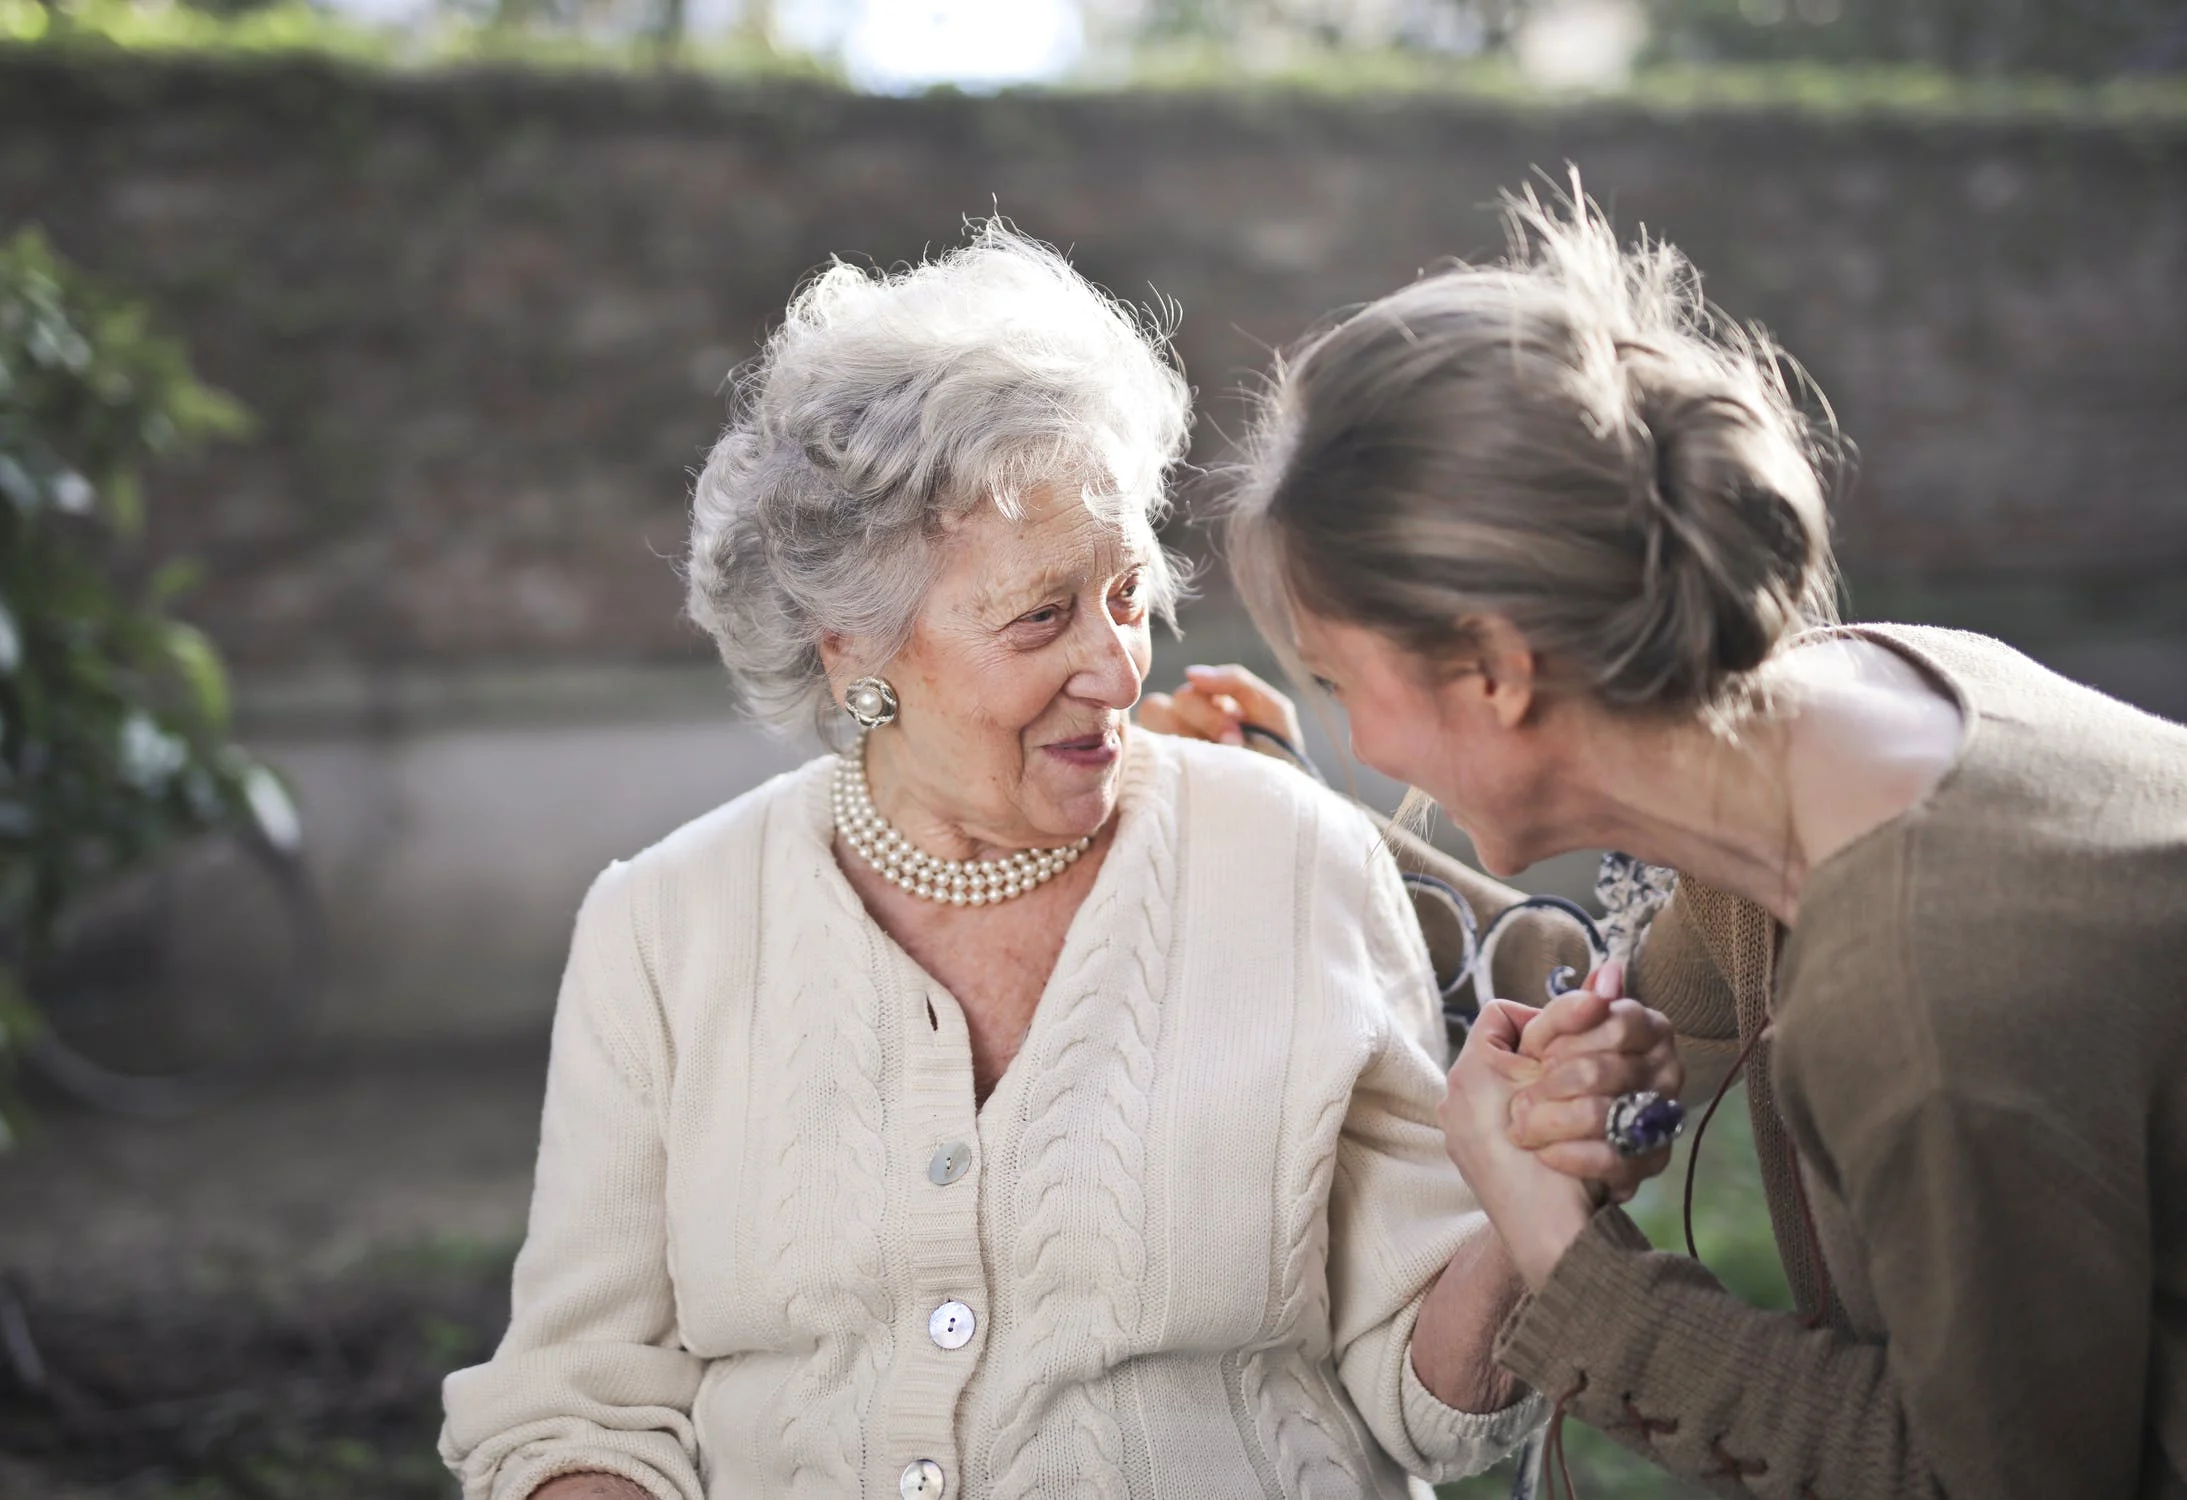 young woman with older woman with Alzheimer's